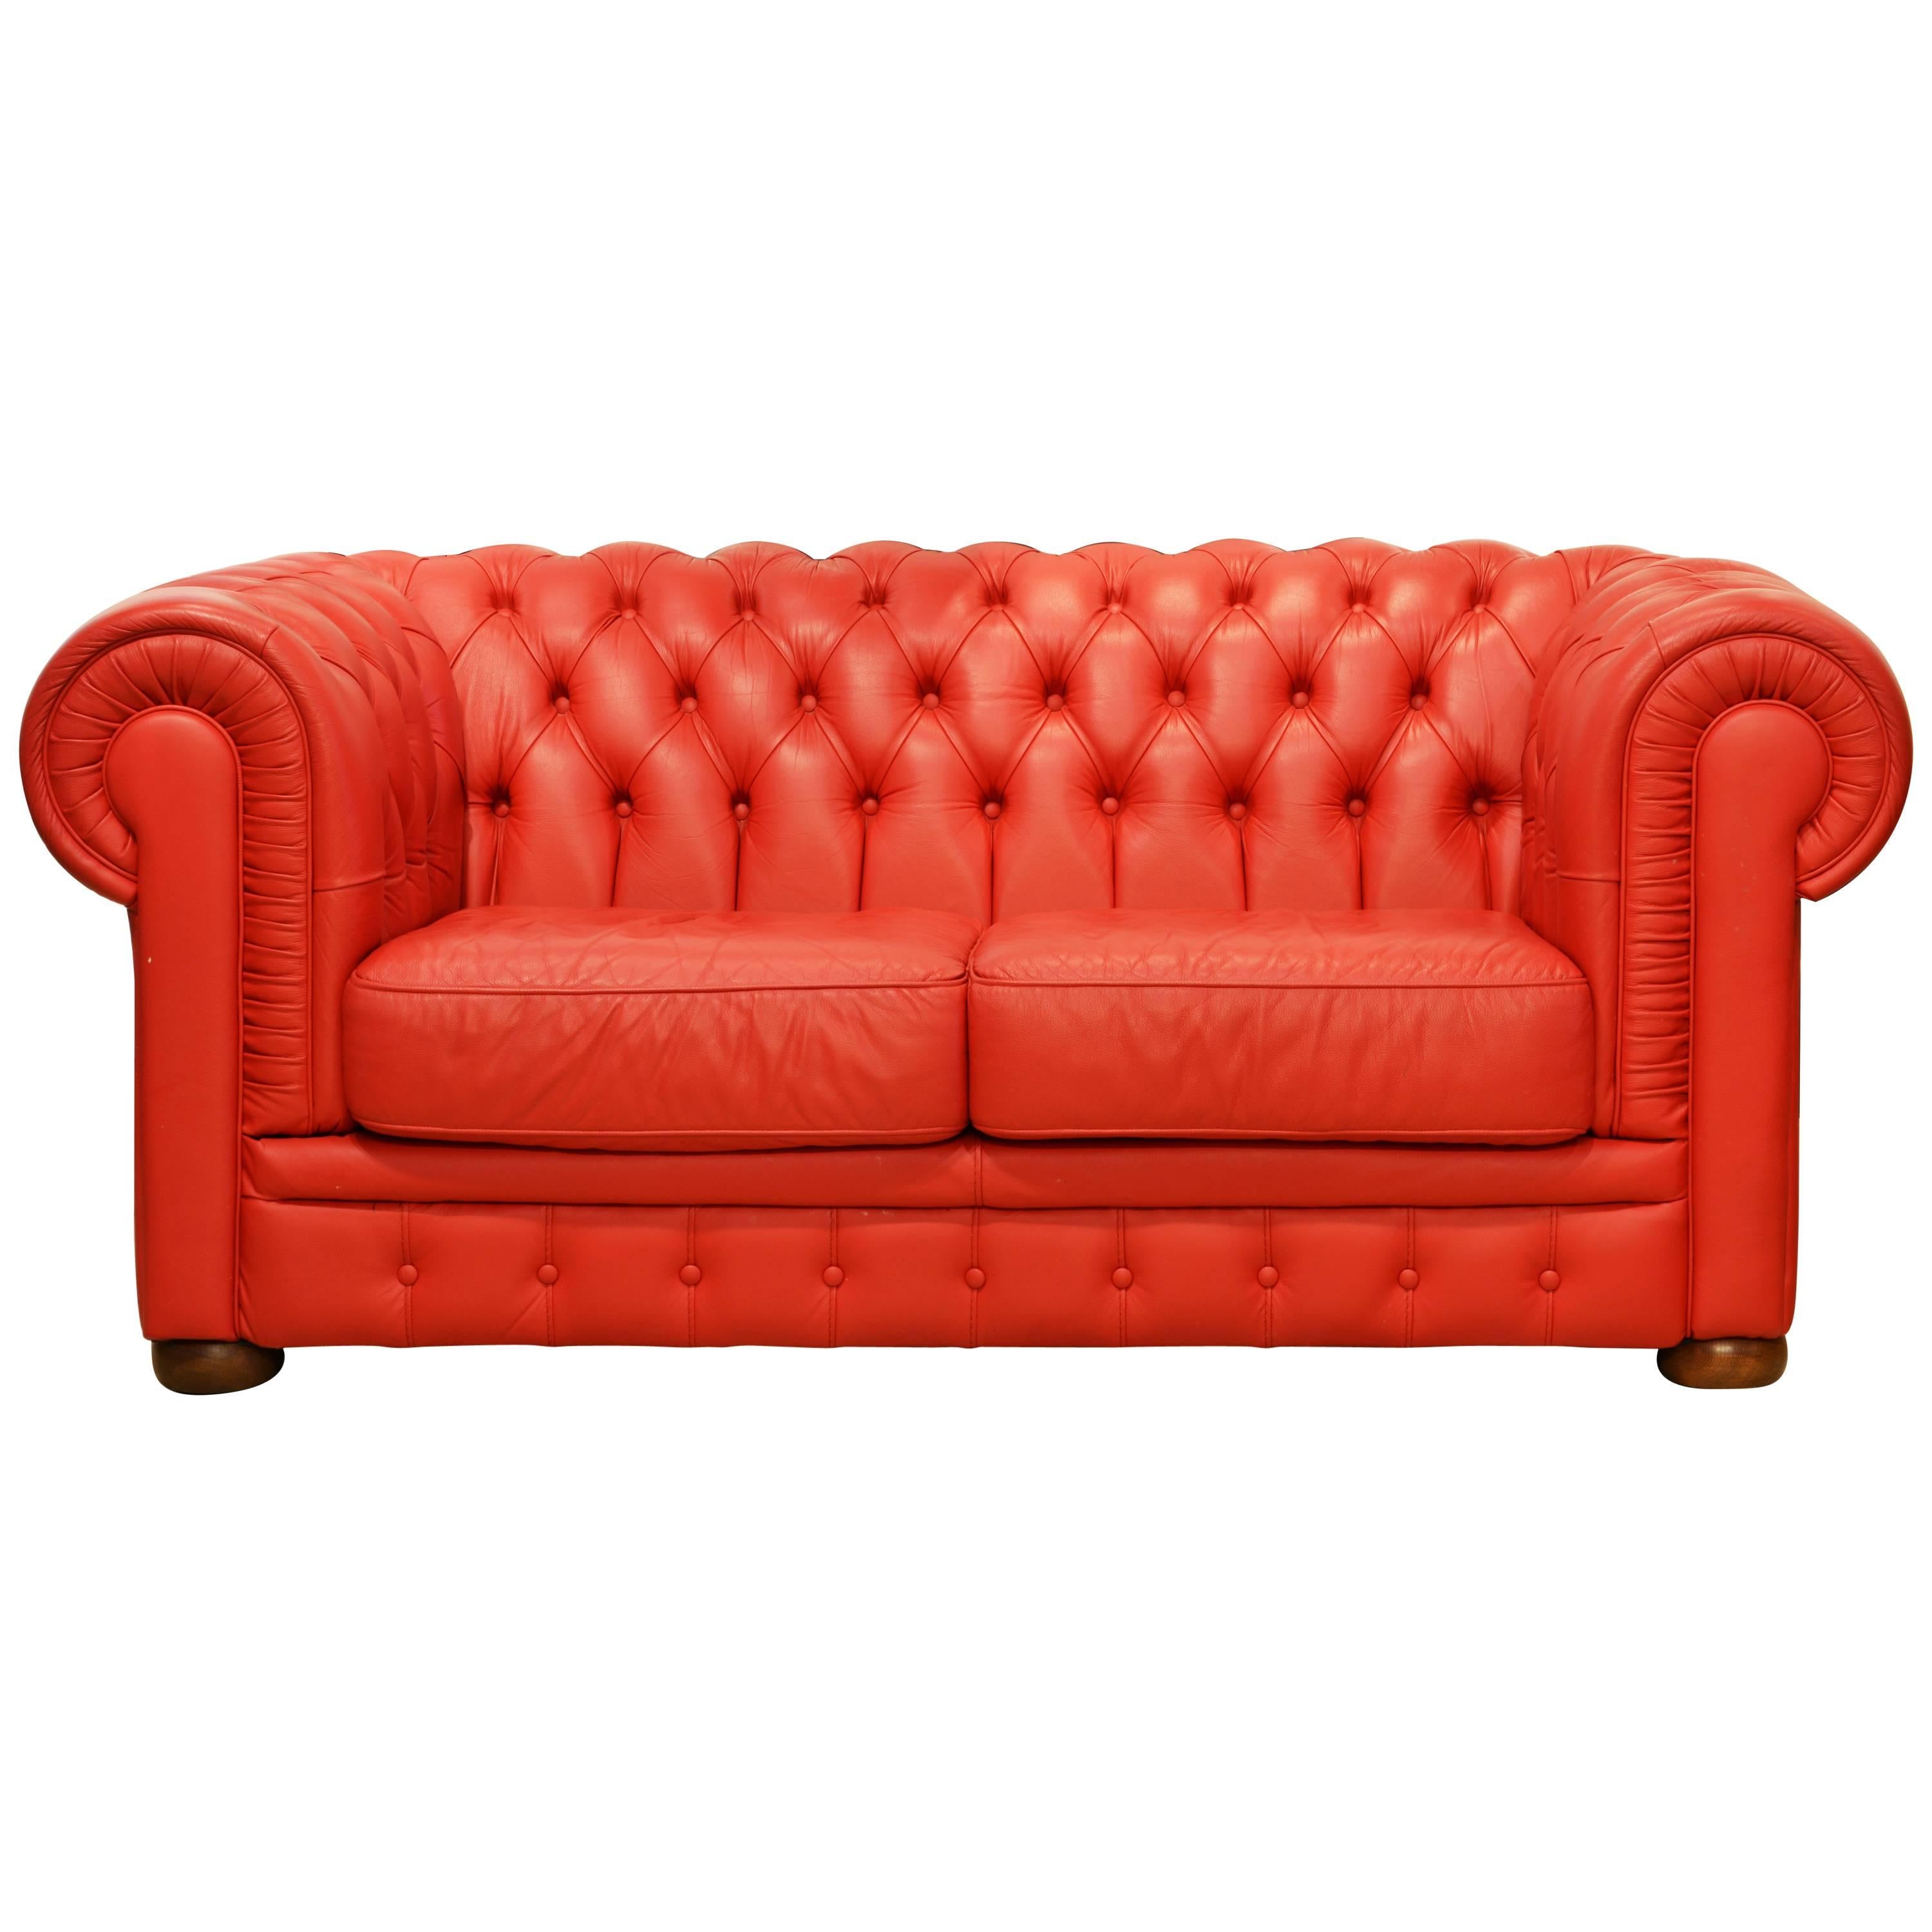 Wonderful Italian Red Leather Chesterfield Sofa in the Style of Poltrona Frau